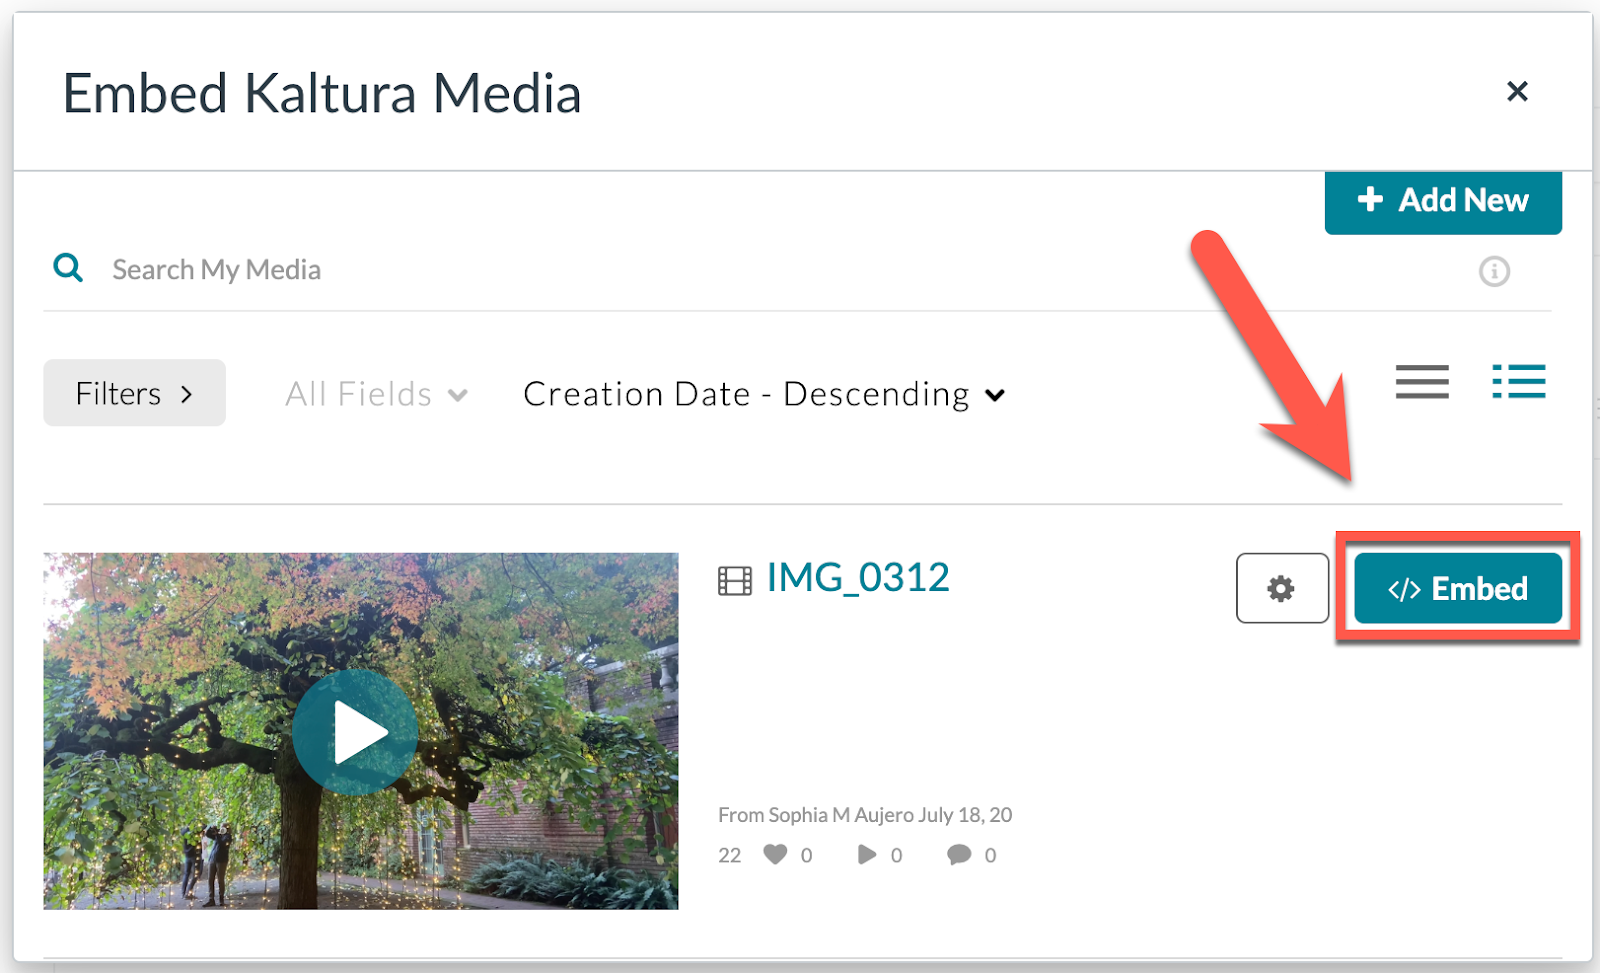 Embed kaltura media page with arrow pointing to embed button